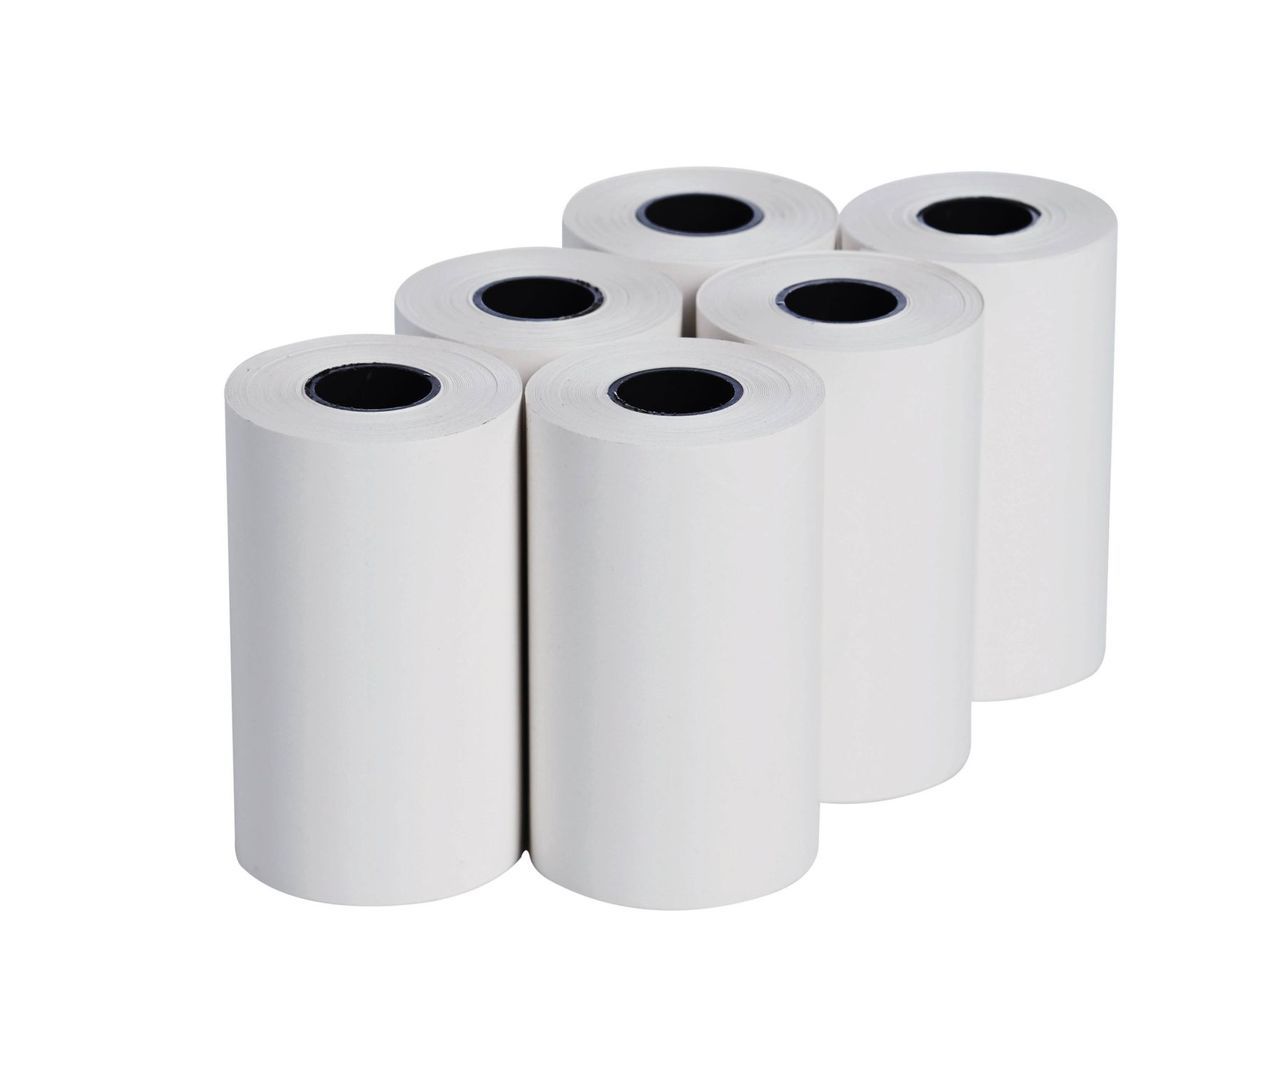 products-0554-0568_thermal_printer_paper__15096.1529418621.1280.1280.jpg